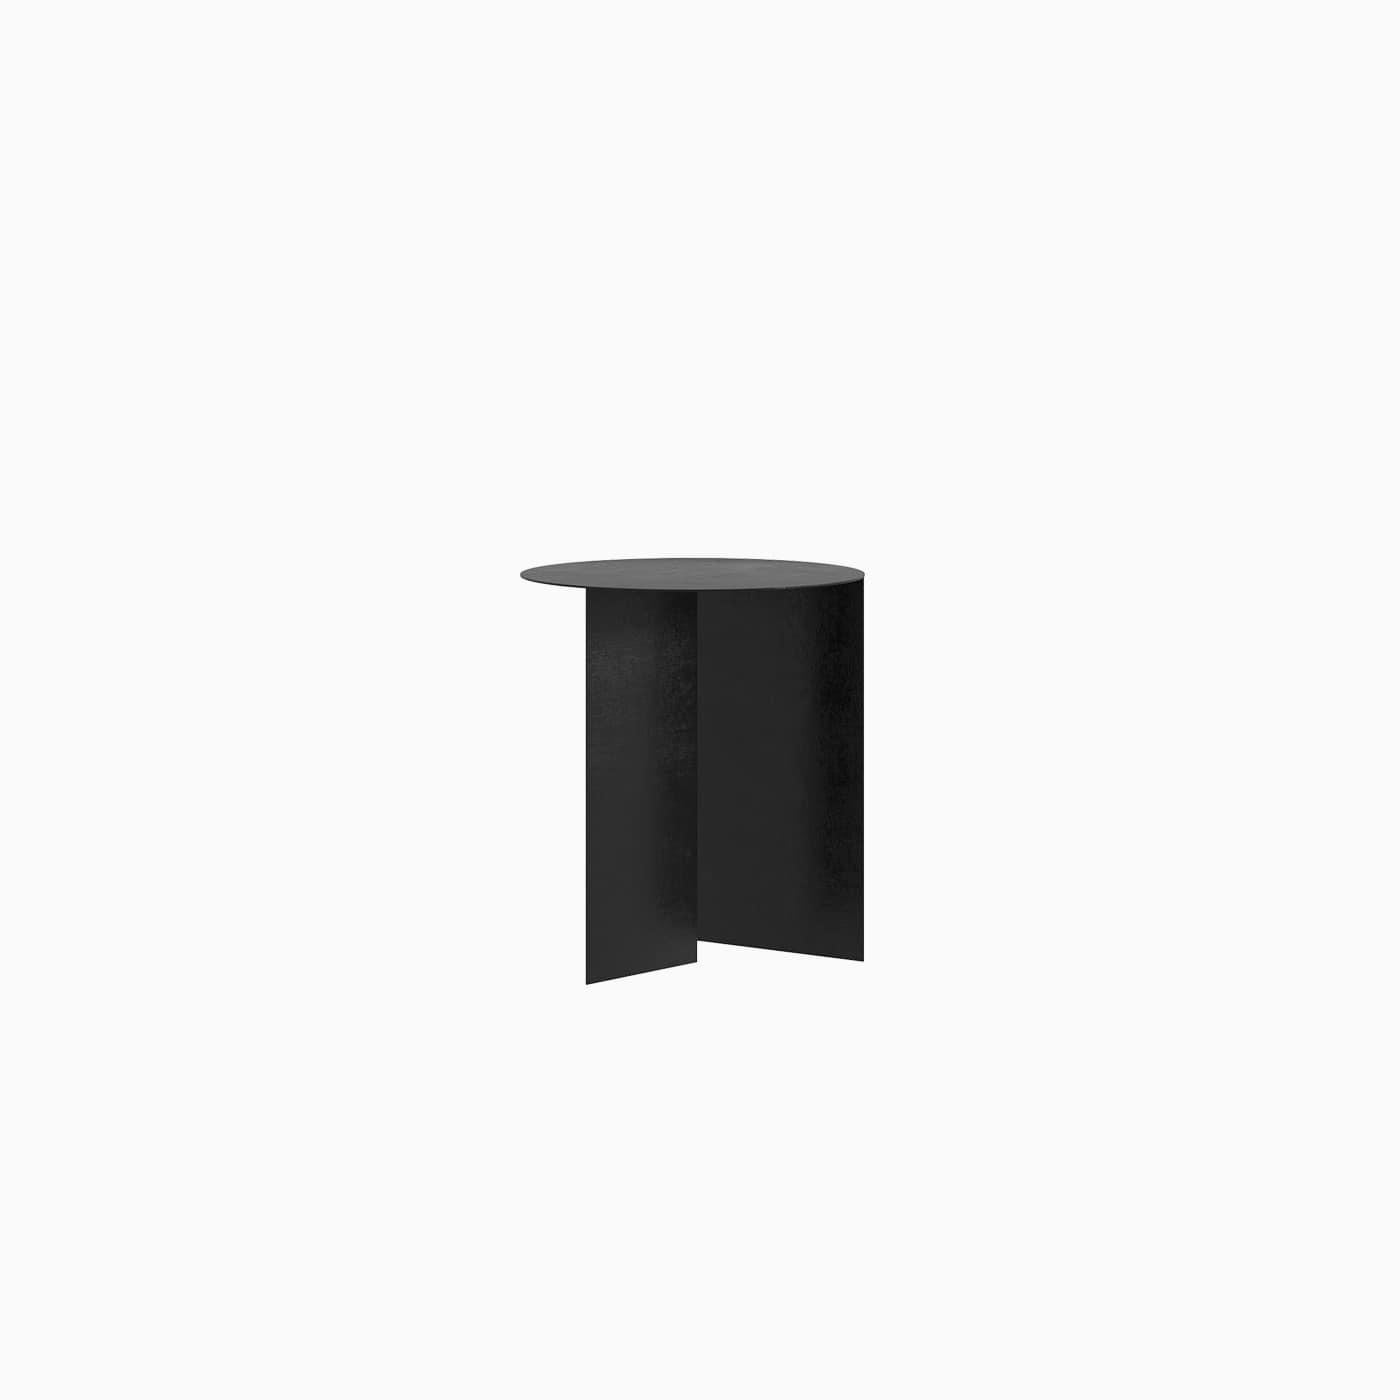 The Deconstructed Side table is an abstraction and geometry study, suitable for both, indoor or outdoor. 
Crafted in galvanized aluminum and coated in matte electrostatic paint, it serves it's purpose as a side table, stool, display platform or